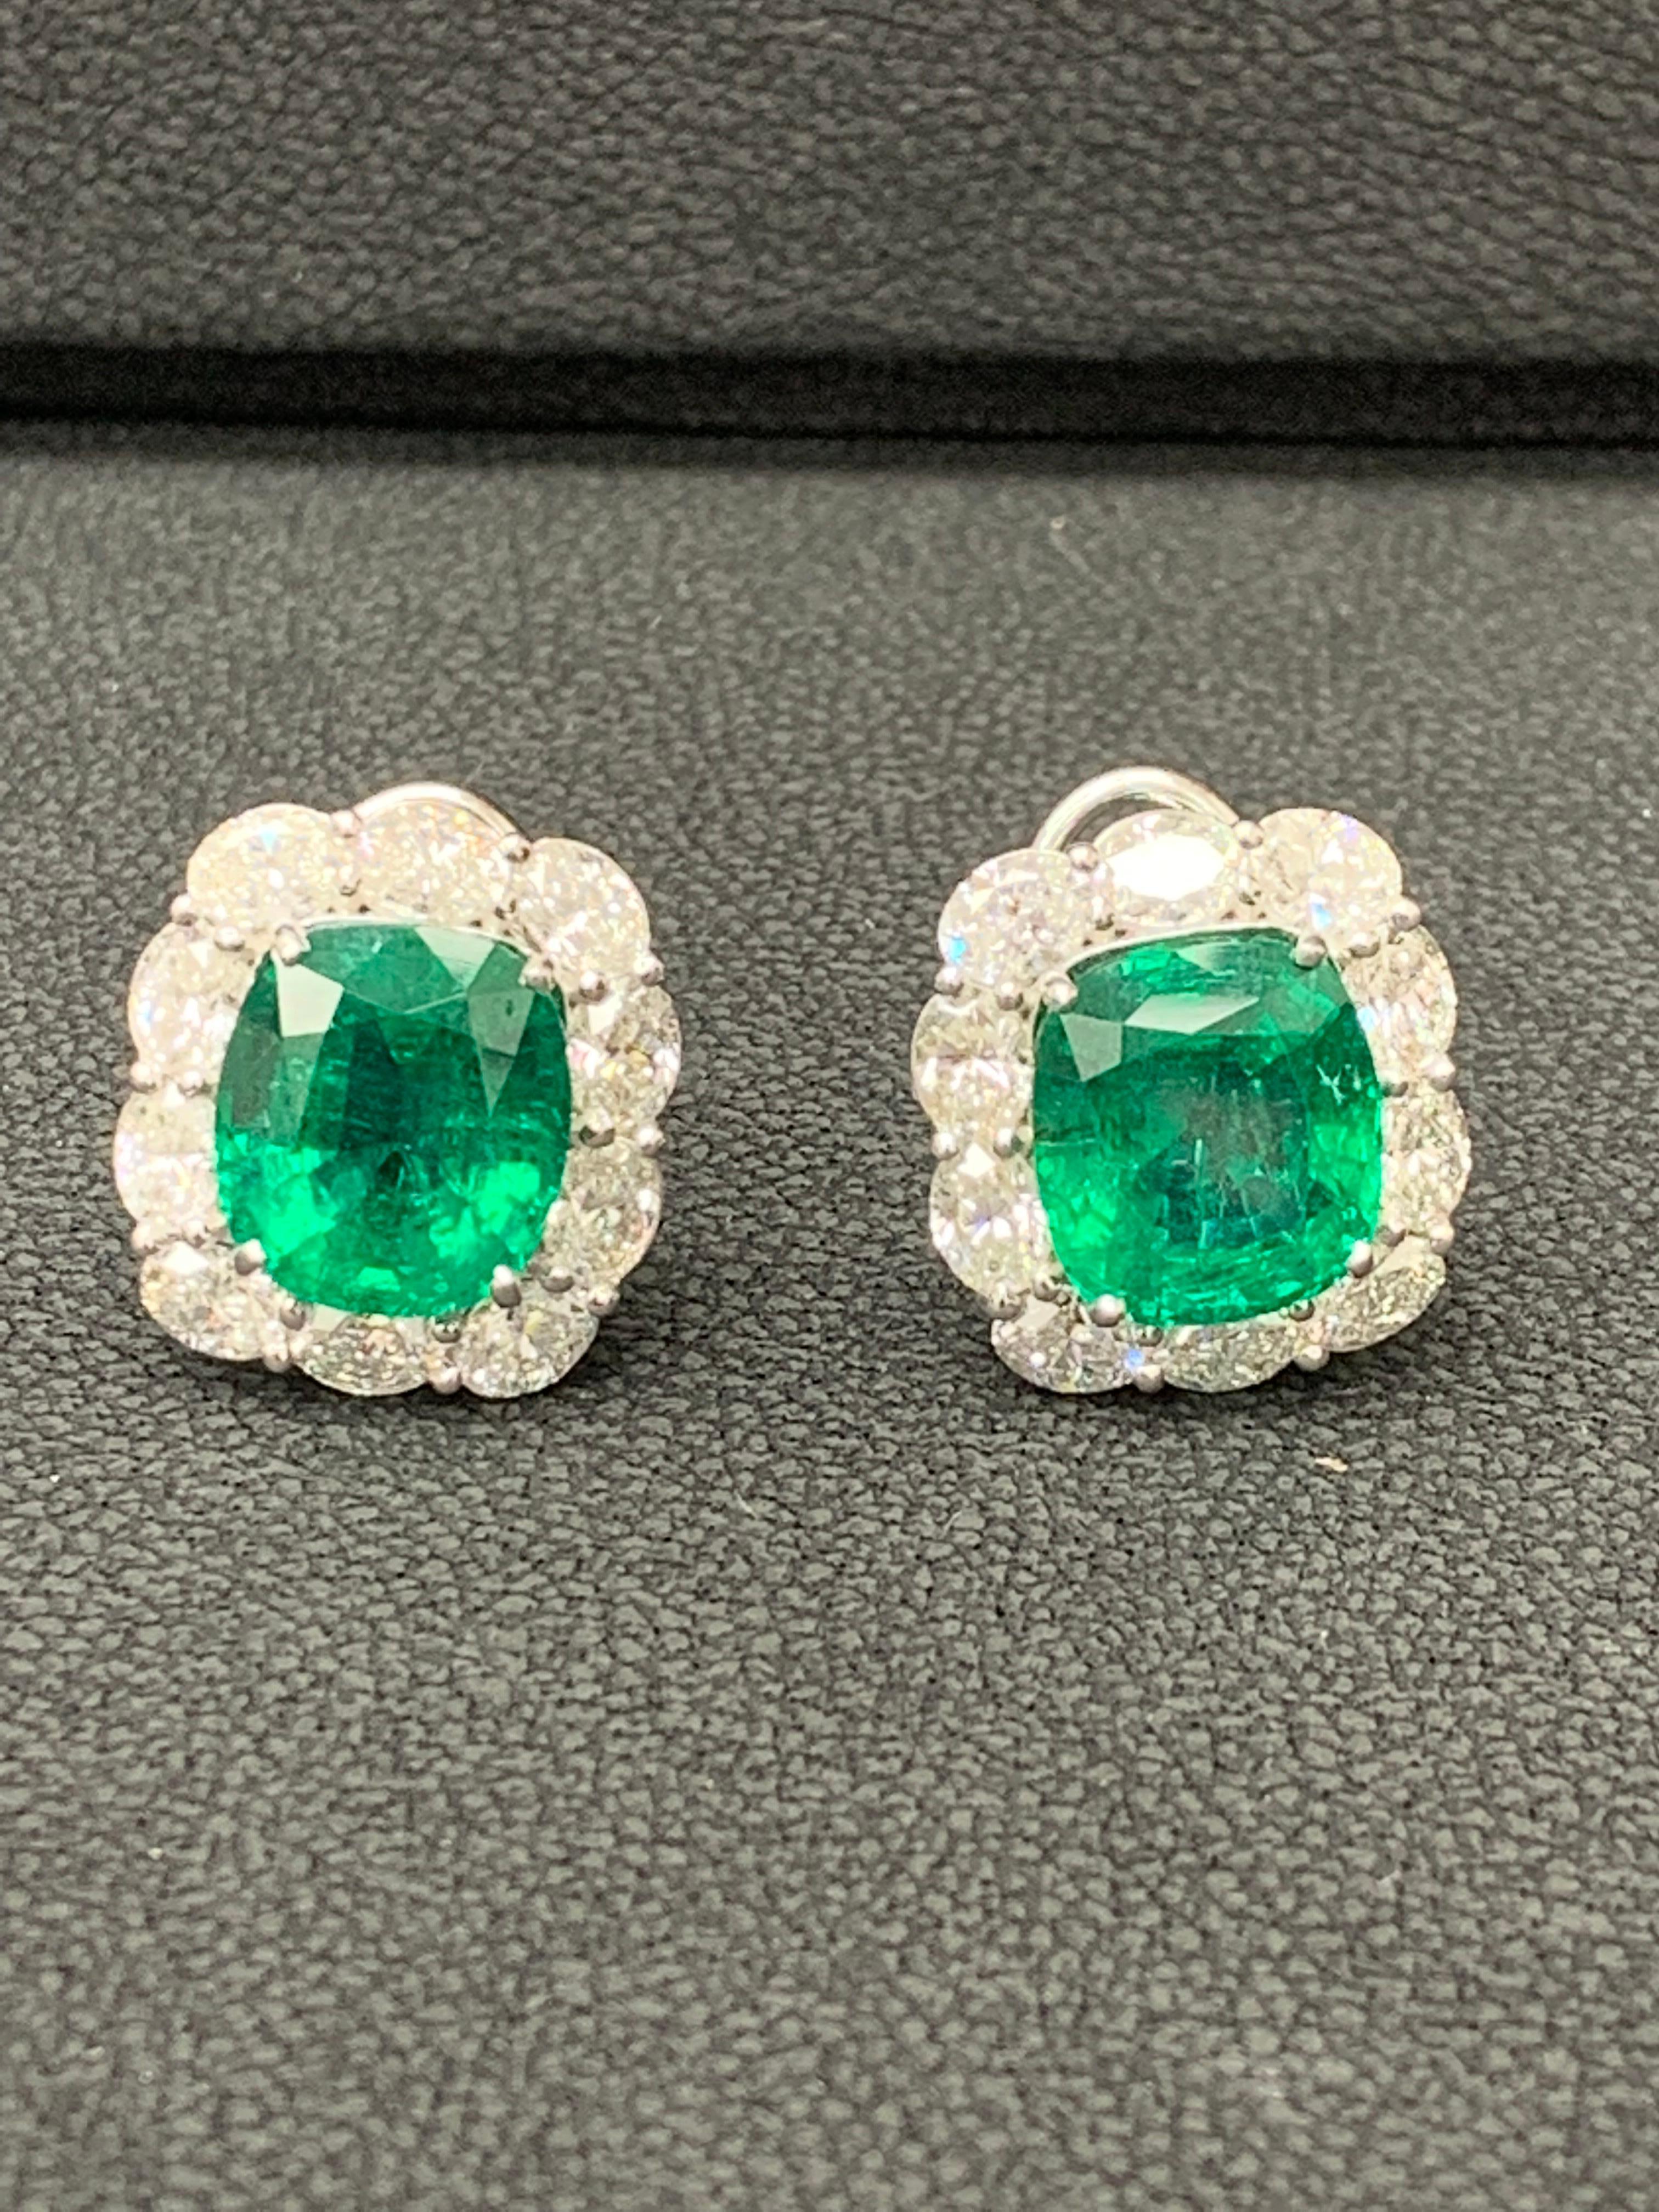 A timeless pair of earrings showcasing two cushion cut emeralds weighing 11.57 carats total, accented with a row of 20 oval shape brilliant diamonds weighing 5.41 carats total. Made in 18k white gold. Omega Clip with post.